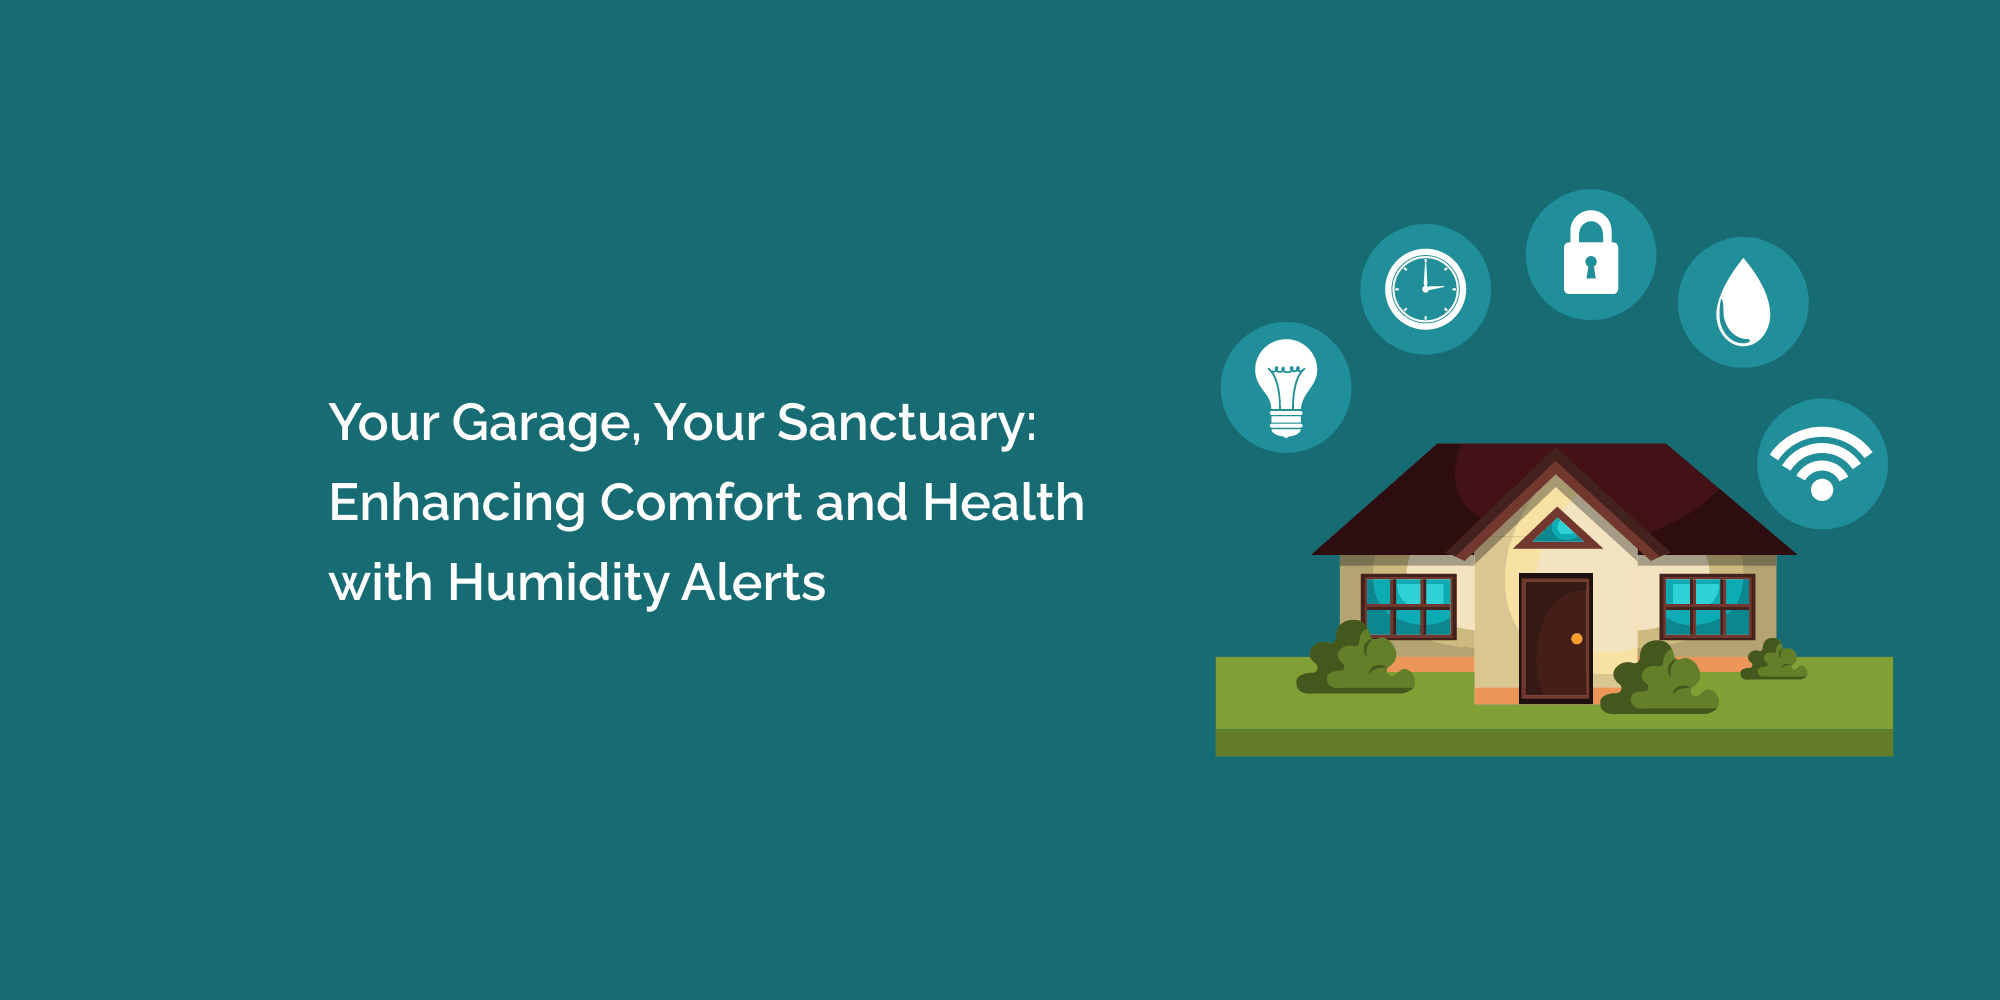 Your Garage, Your Sanctuary: Enhancing Comfort and Health with Humidity Alerts